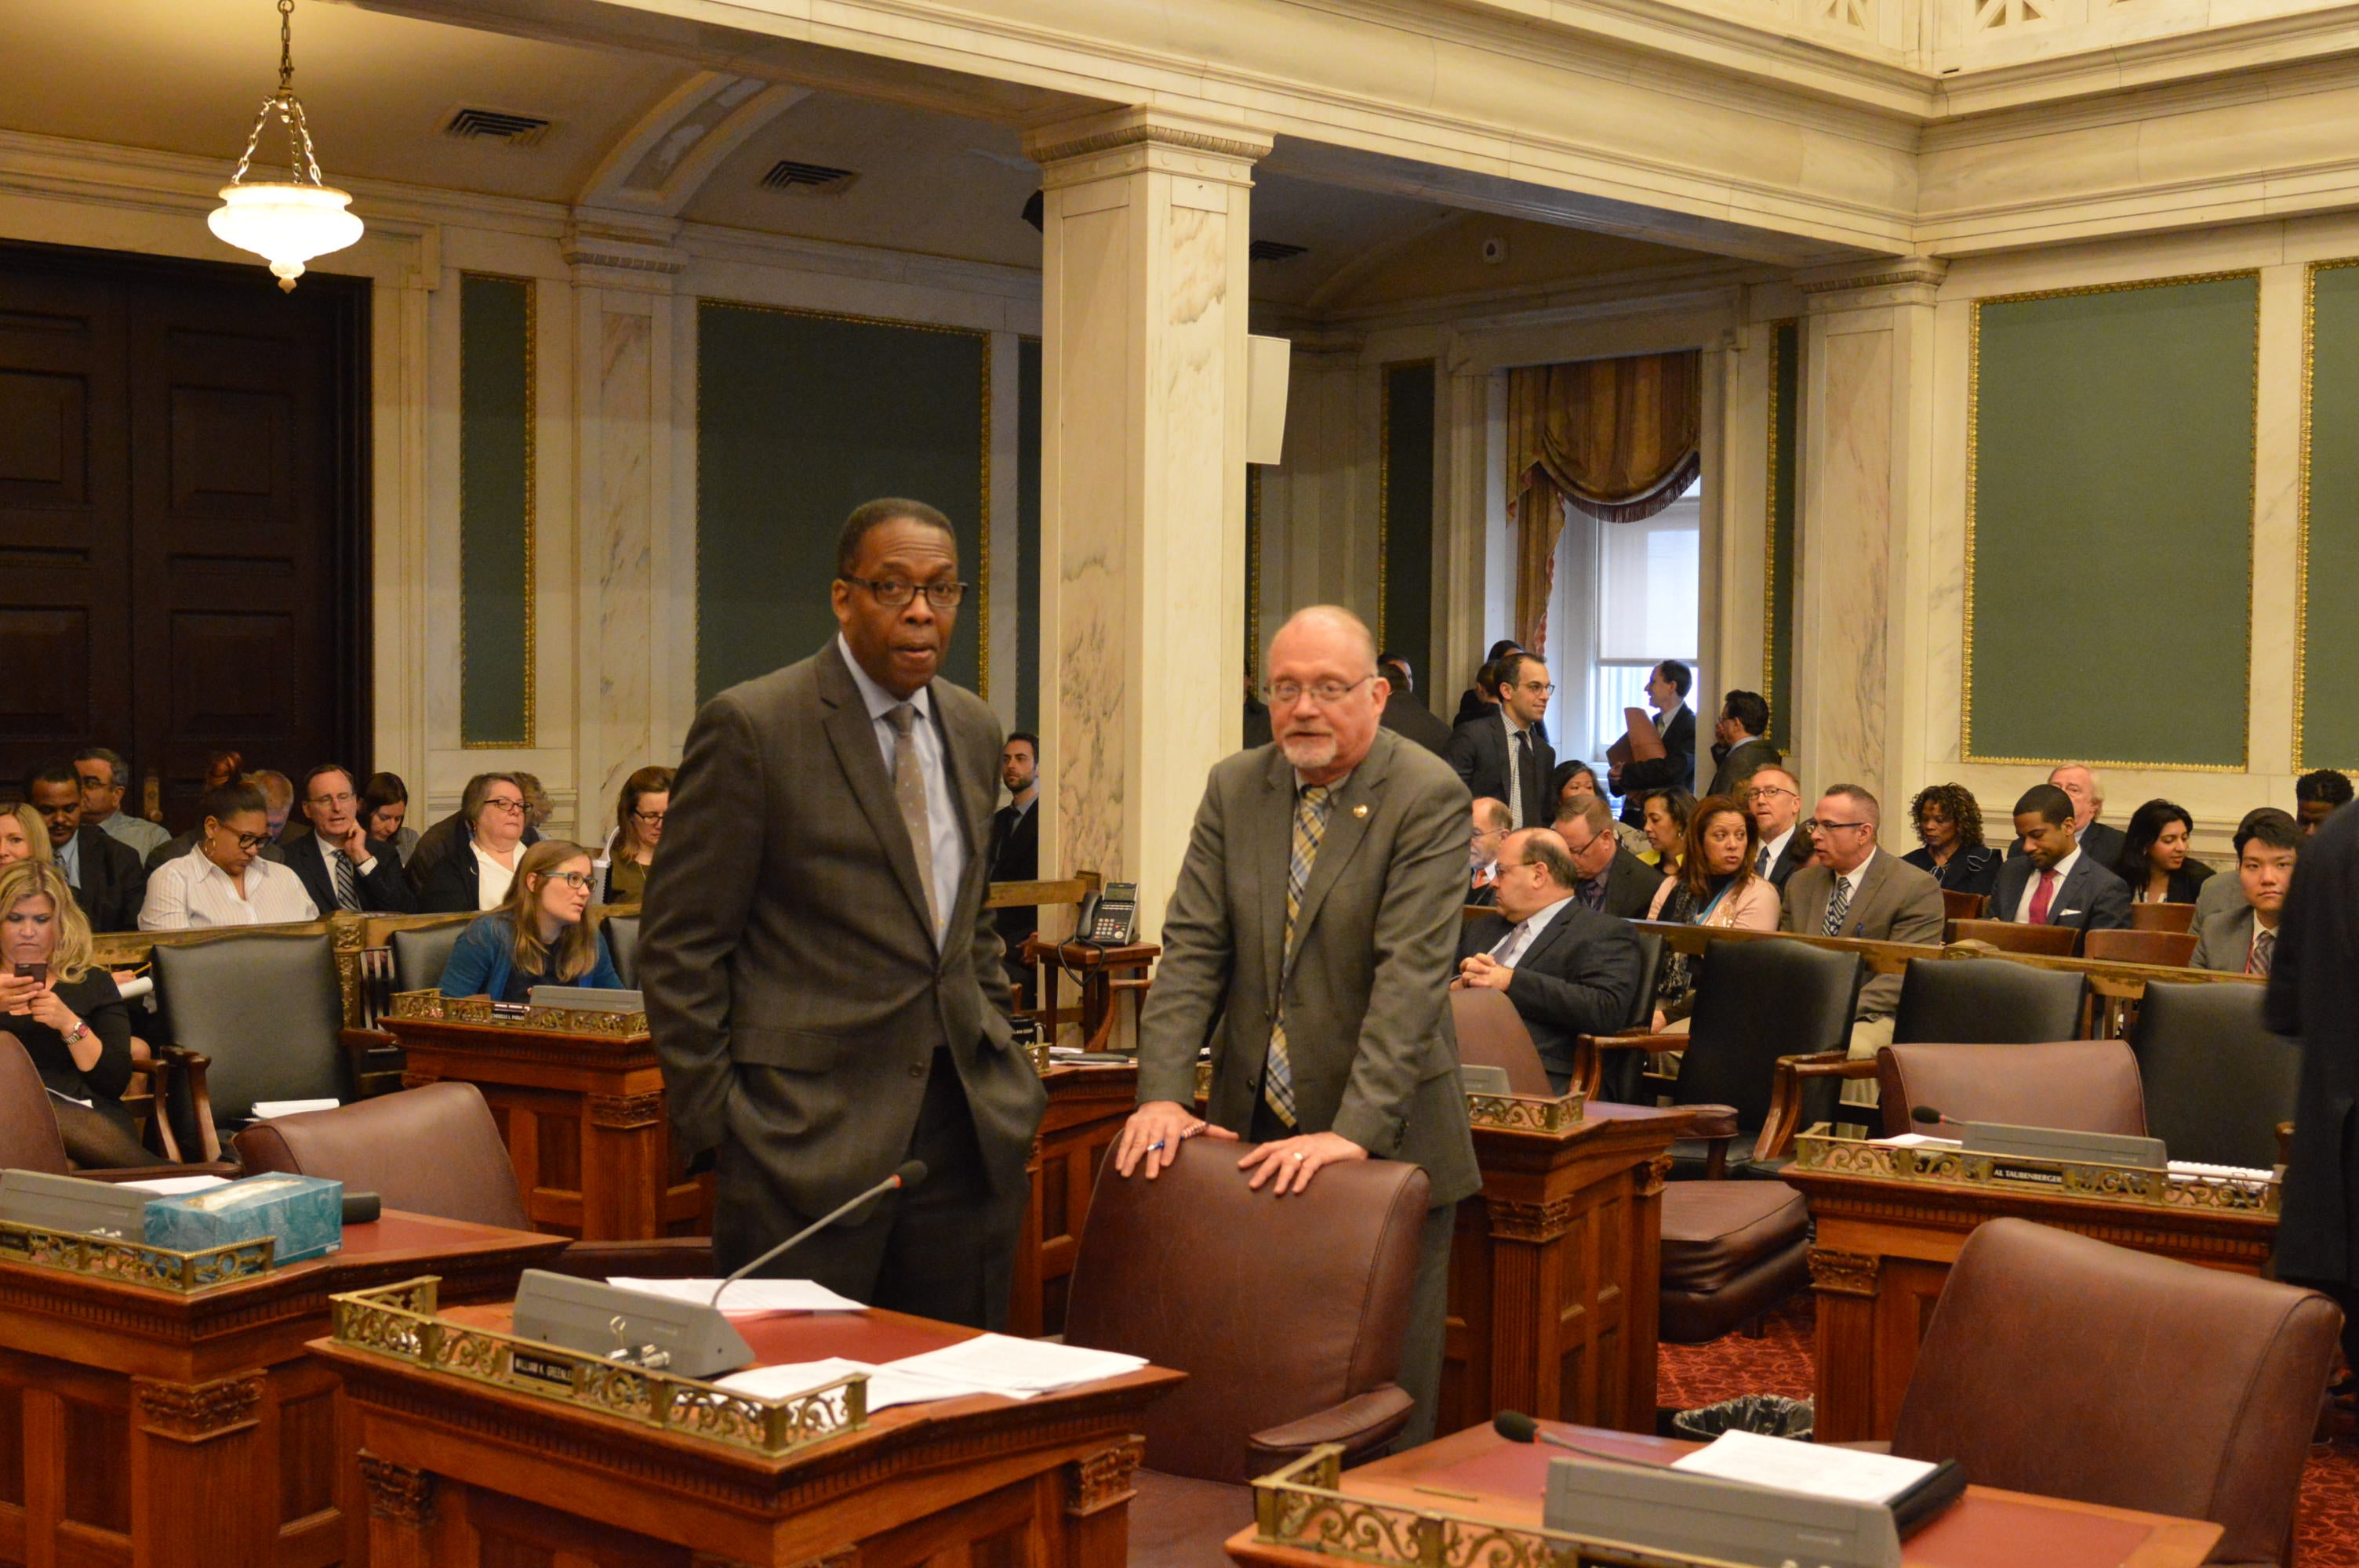  Philadelphia Council President Darrell Clarke and Councilman Bill Greenlee confer Tuesday. (Tom MacDonald/WHYY) 